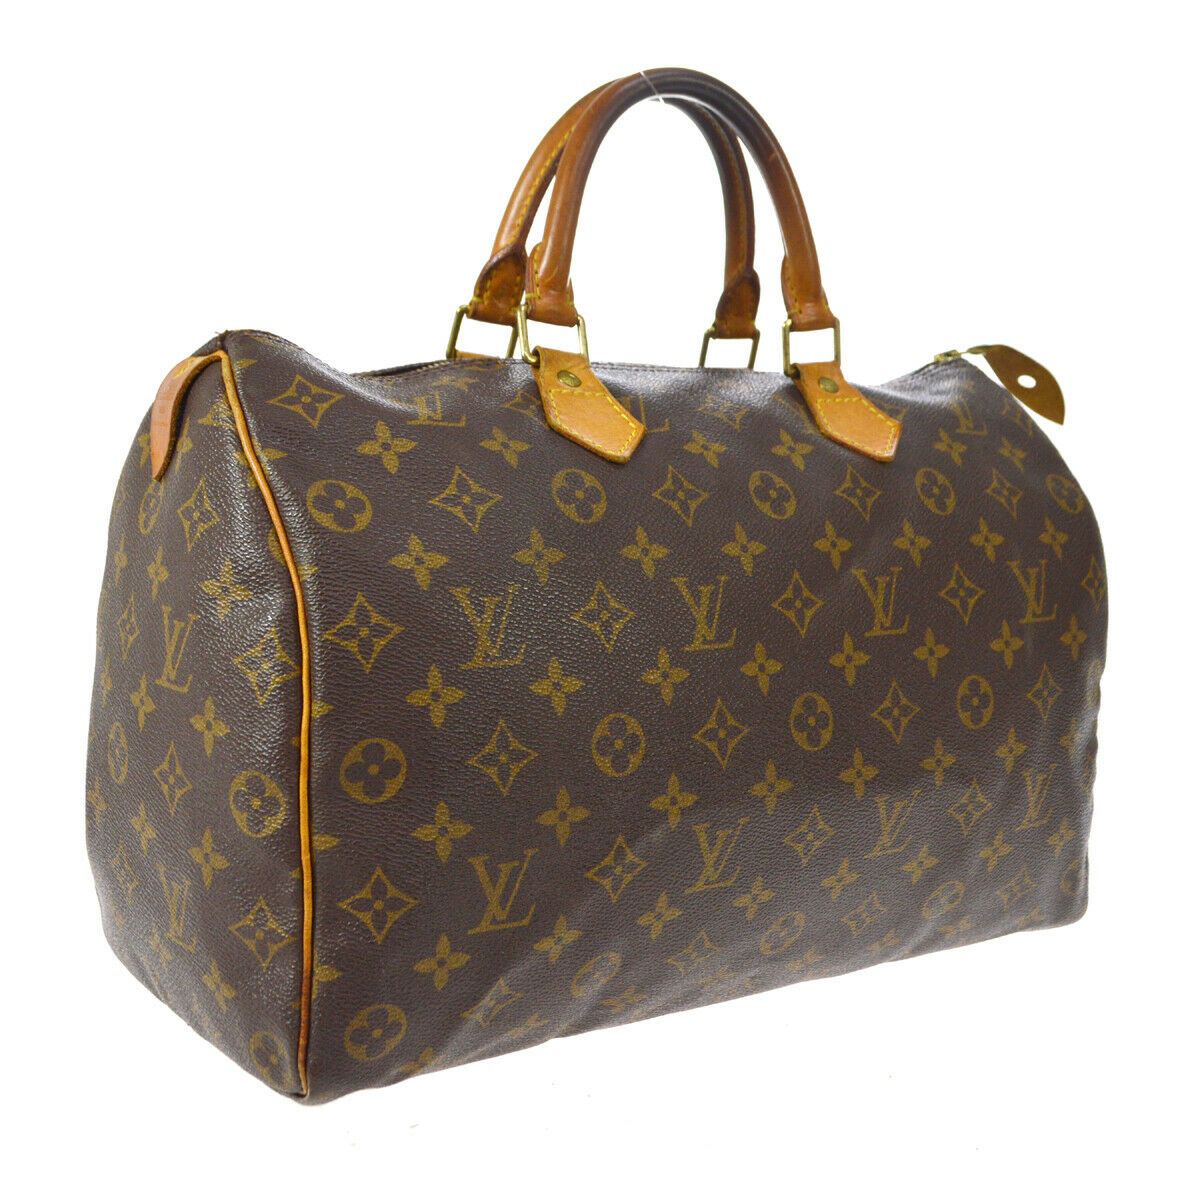 Pre-Owned LOUIS VUITTON SPEEDY 35 HAND BAG MONOGRAM CANVAS LEATHER